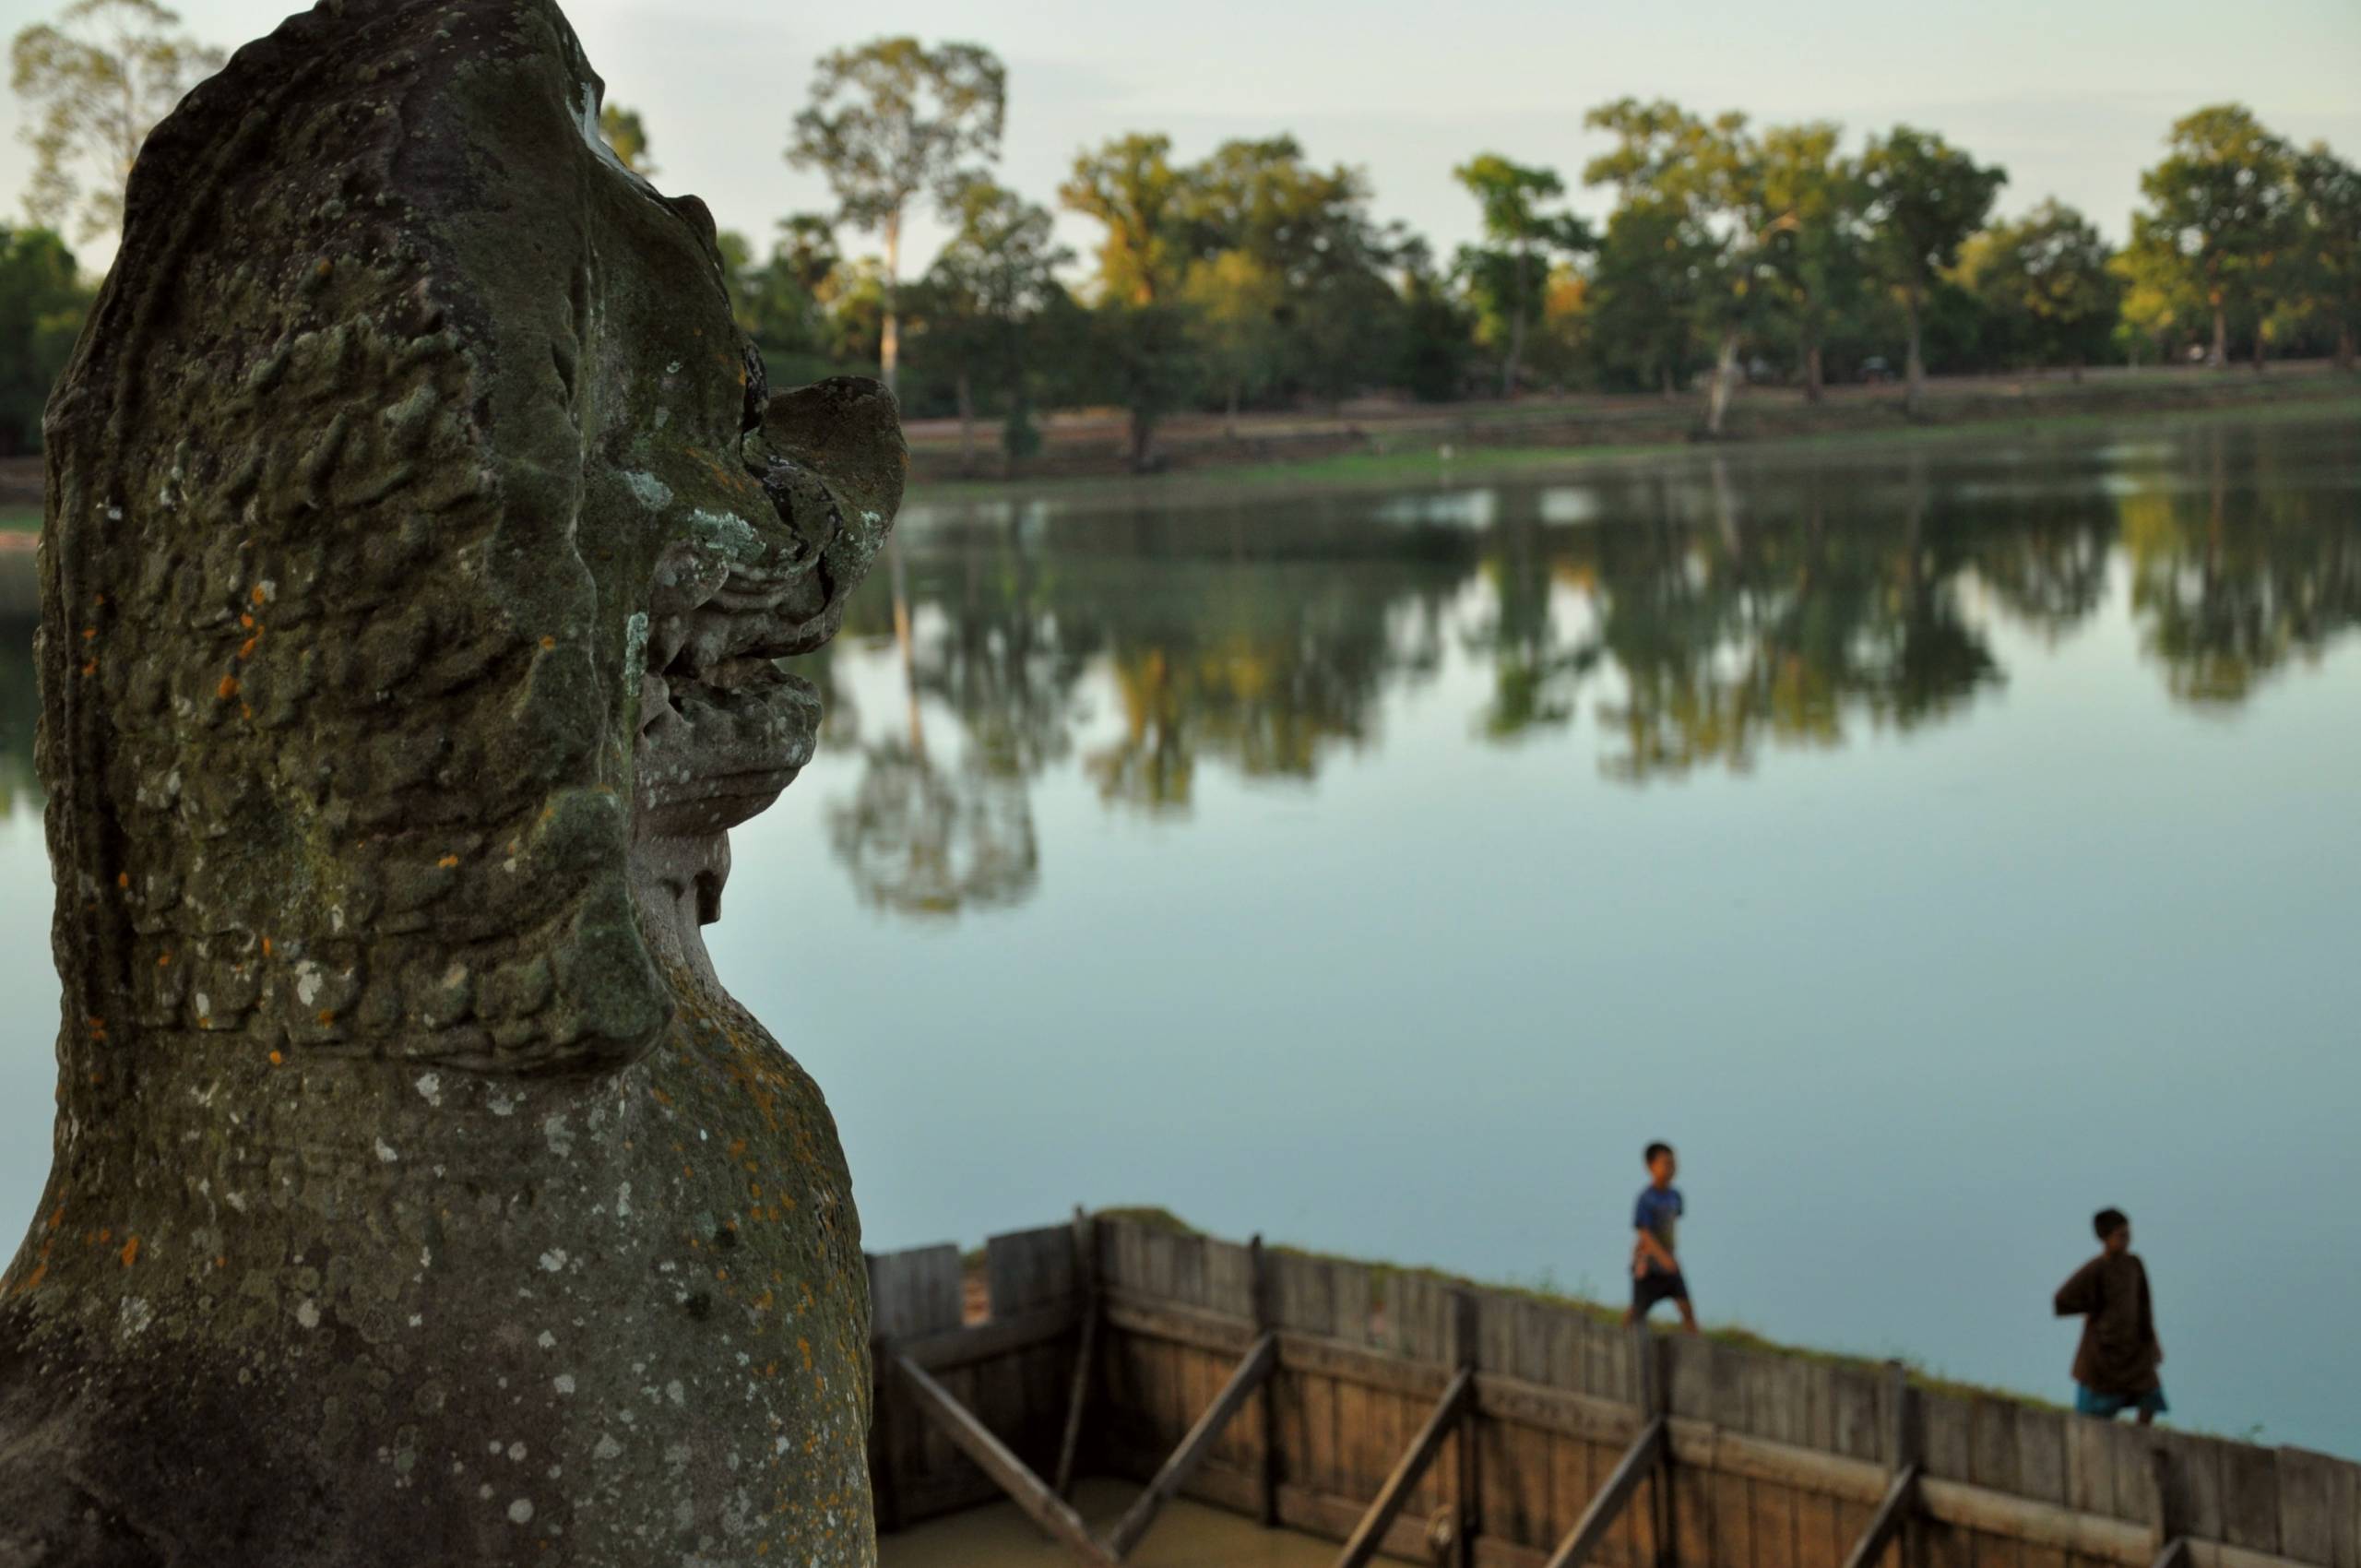 A serene water body surrounded by trees and shrubs, known as Srah Srang in Cambodia